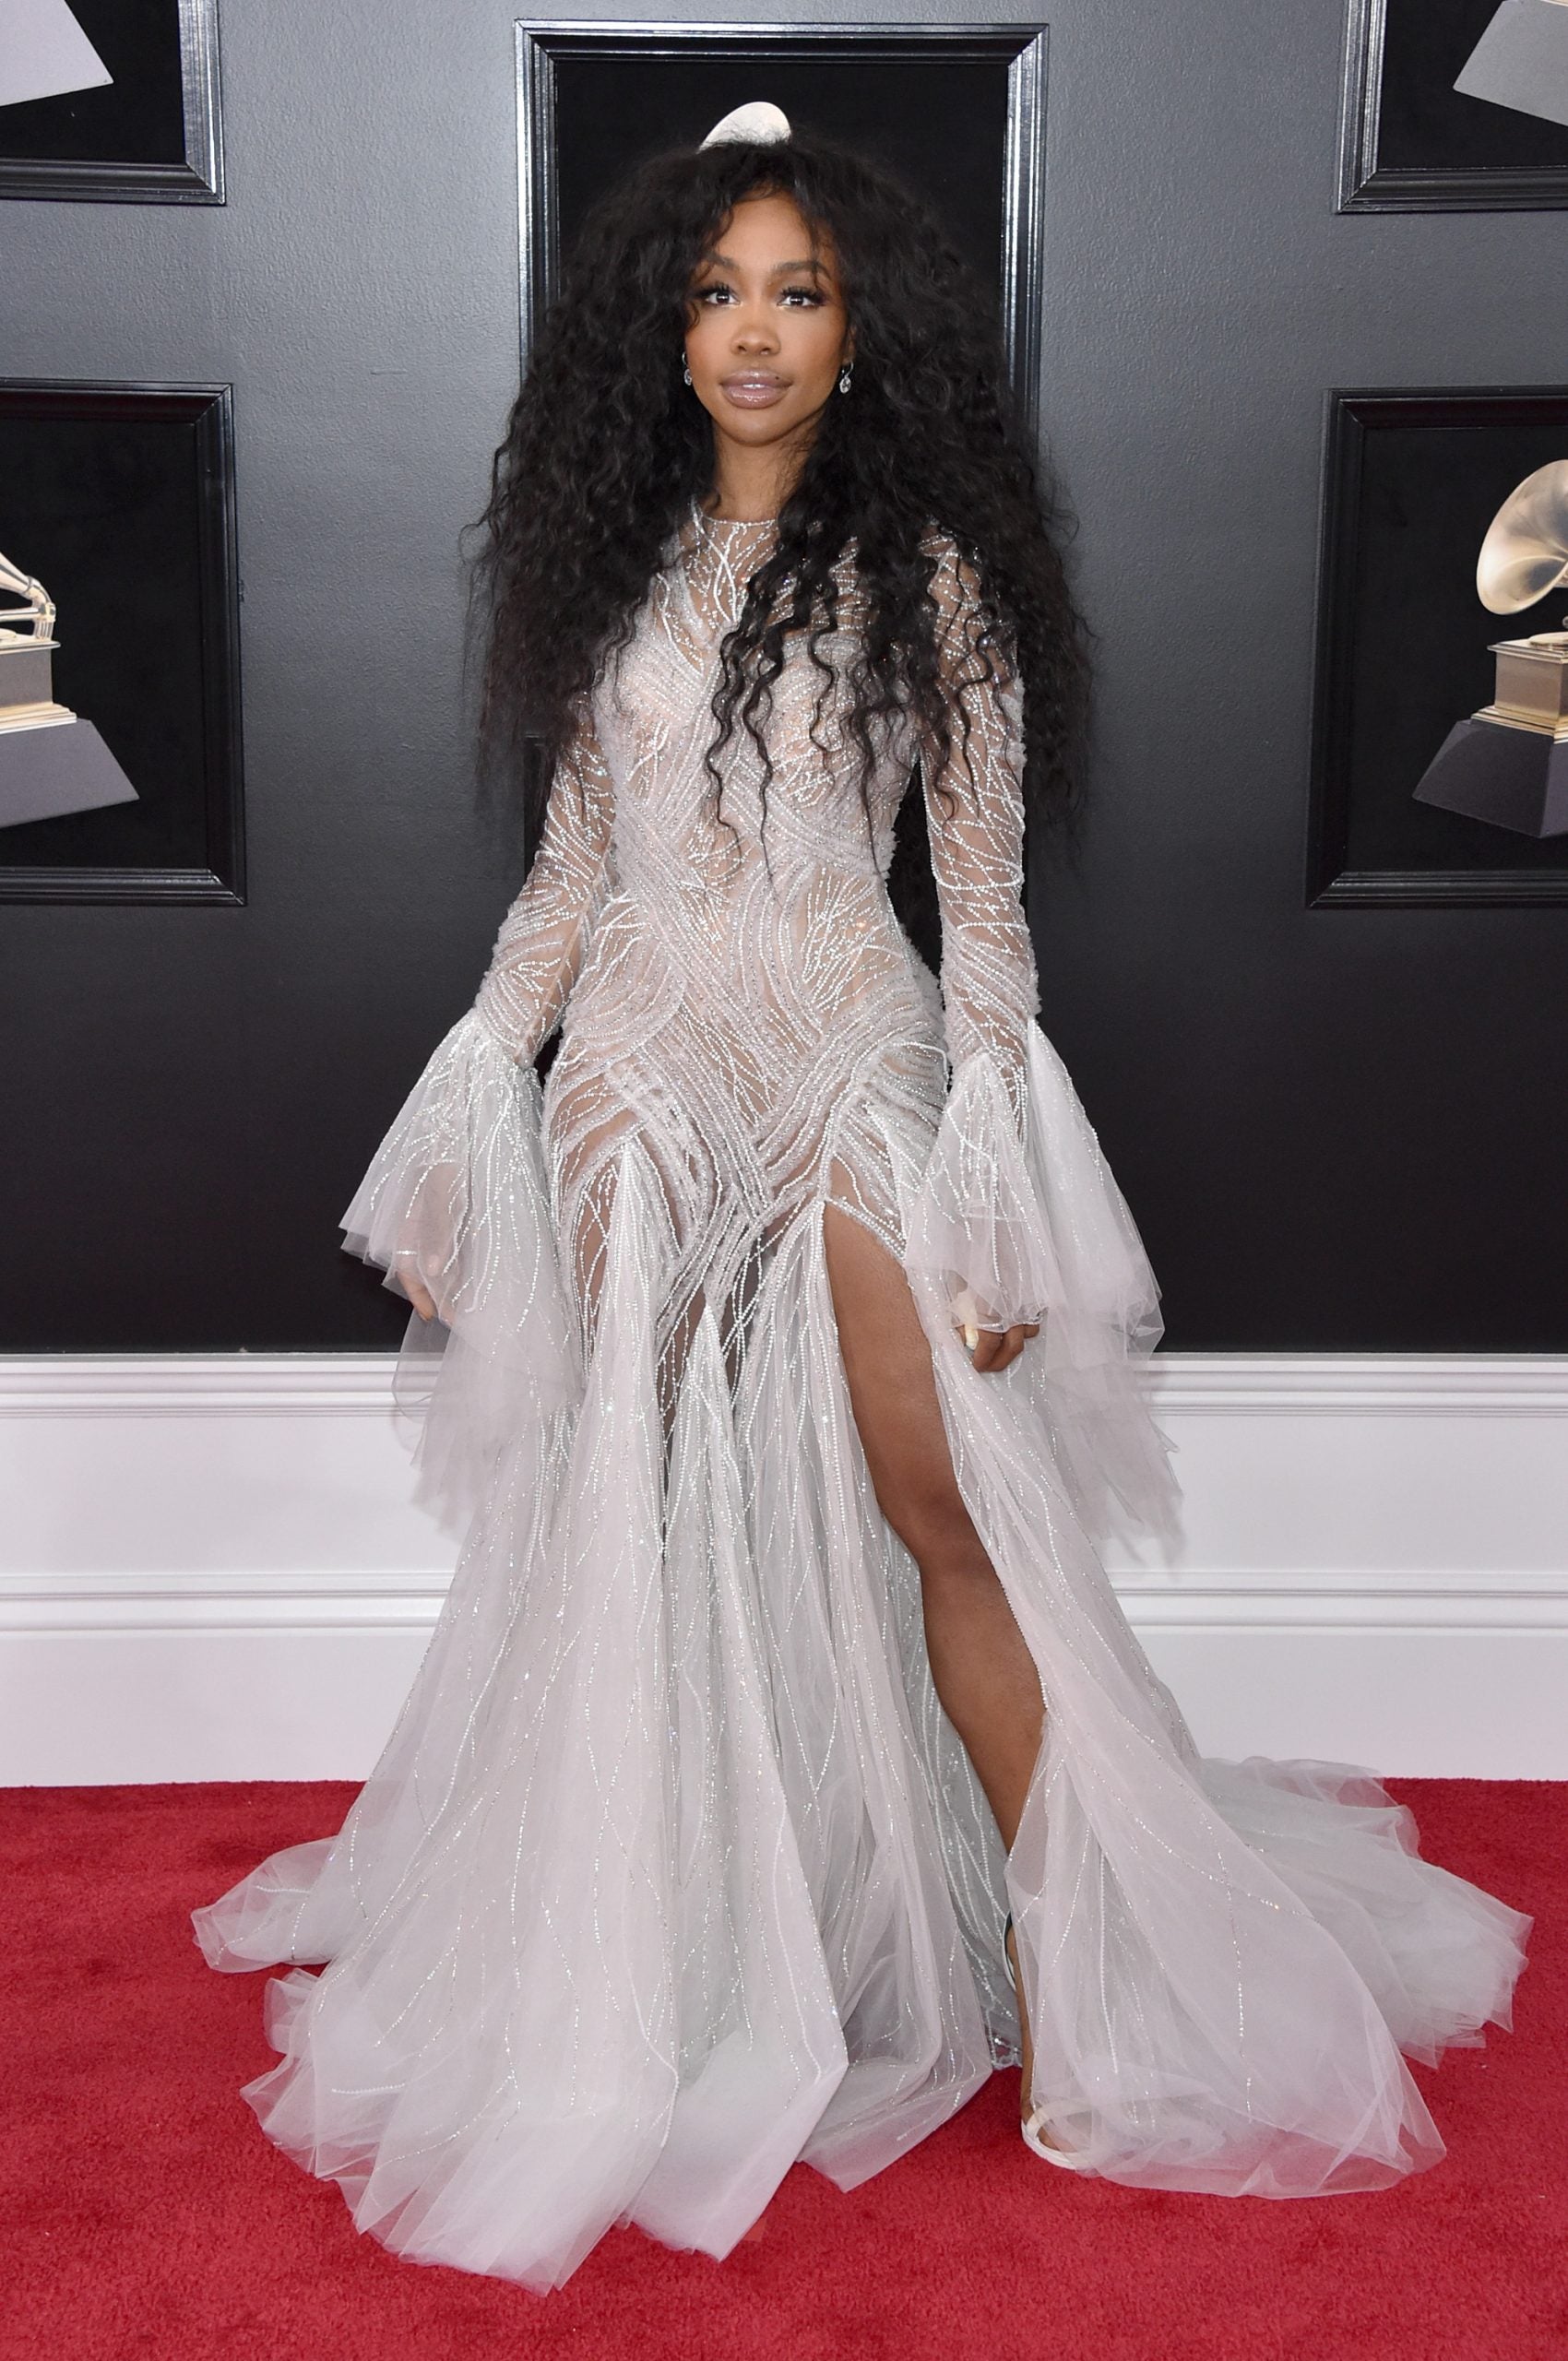 Grammys 2024 Red Carpet Predictions According To Horoscope Signs